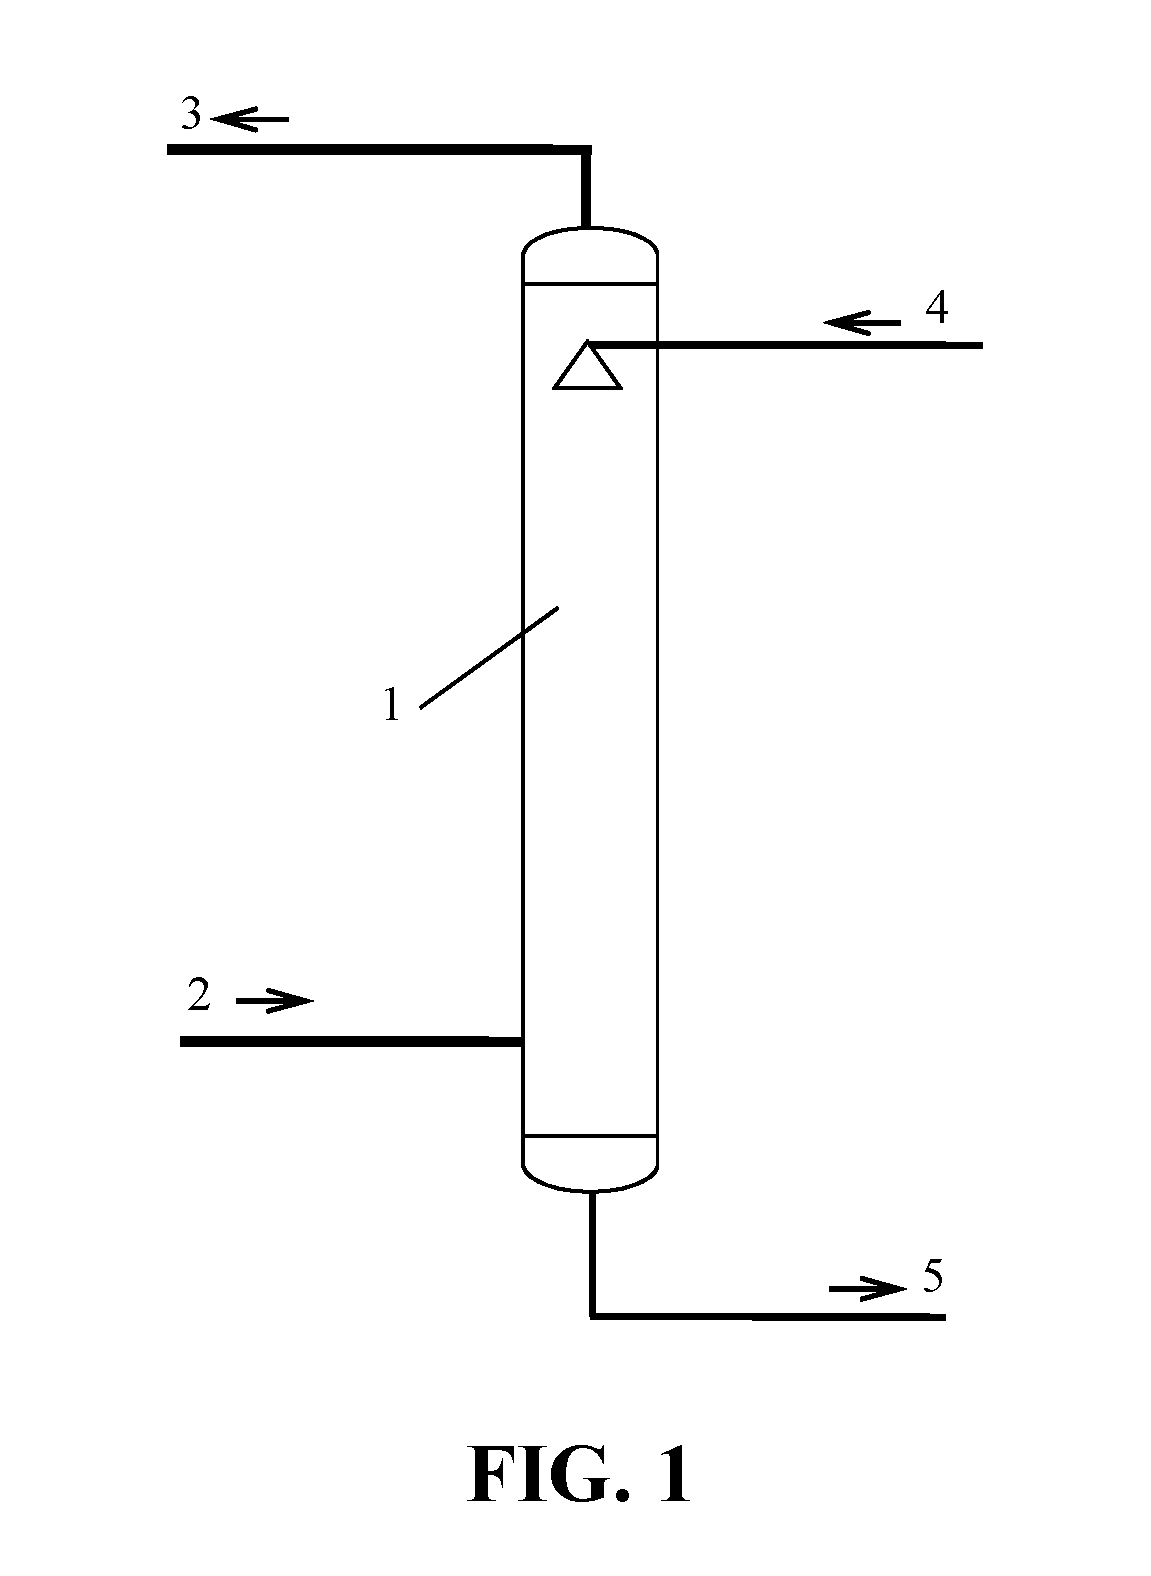 Method for Removing SOx from Gas Using Ethylene Glycol Composite Solution